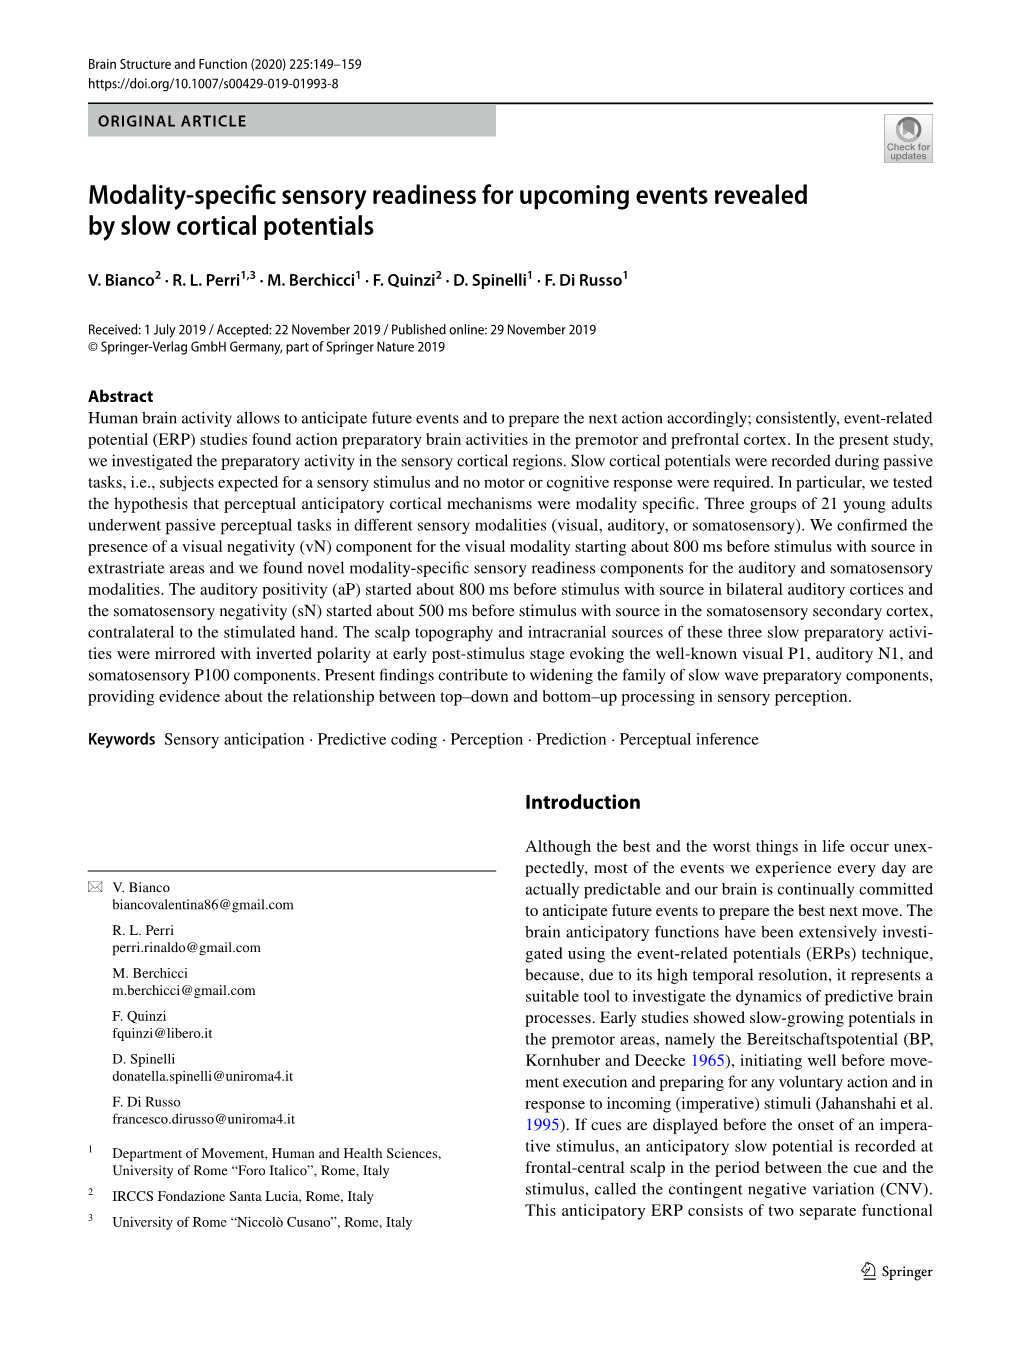 Modality-Specific Sensory Readiness for Upcoming Events Revealed by Slow Cortical Potentials